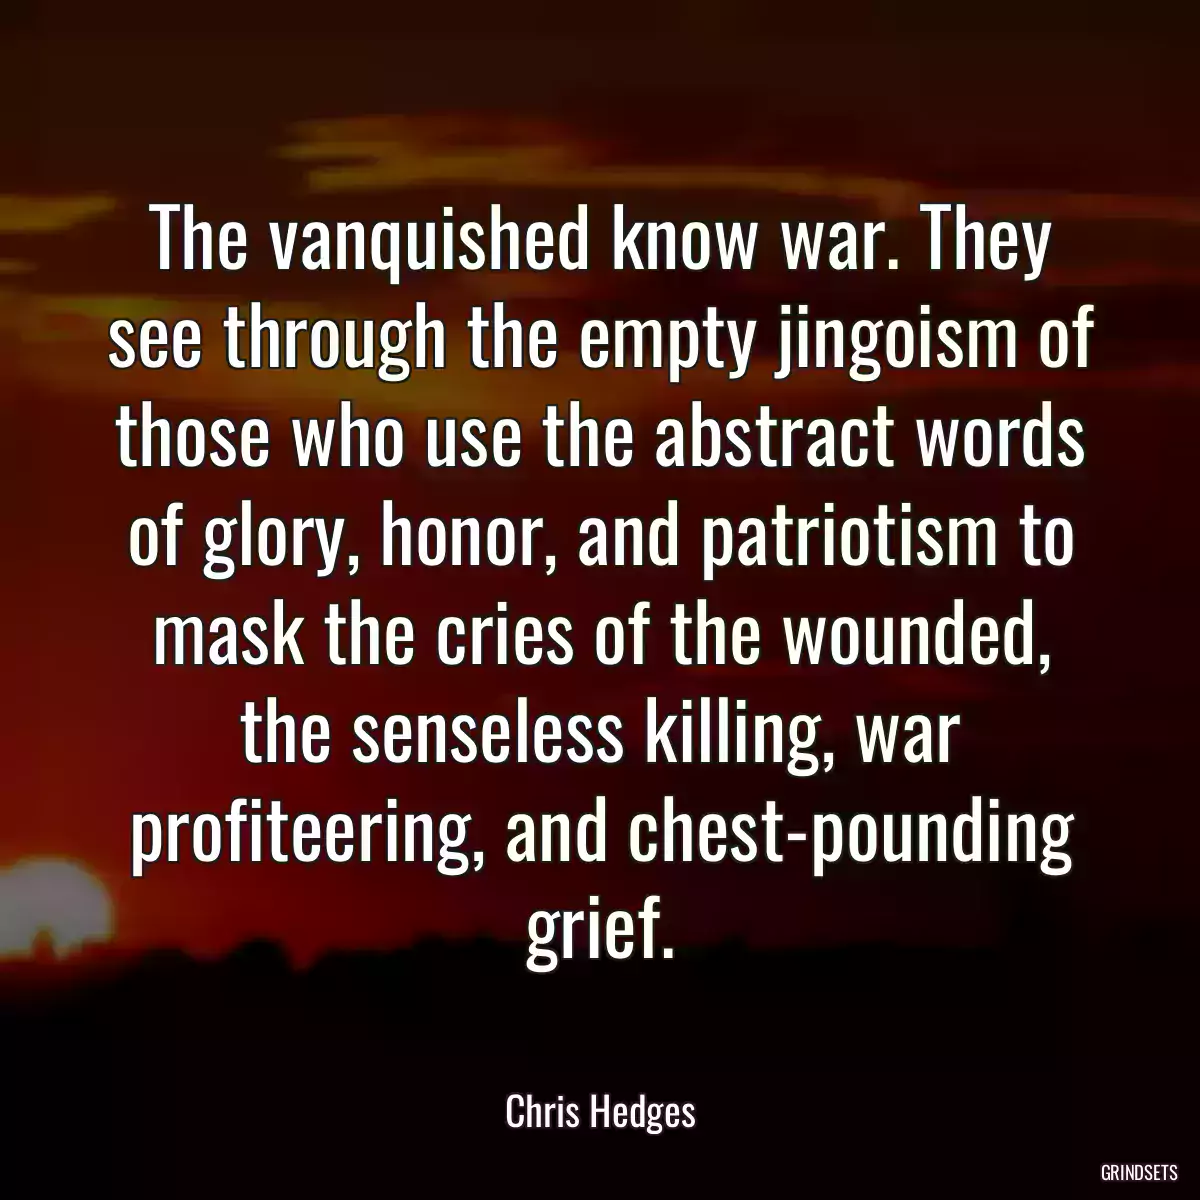 The vanquished know war. They see through the empty jingoism of those who use the abstract words of glory, honor, and patriotism to mask the cries of the wounded, the senseless killing, war profiteering, and chest-pounding grief.